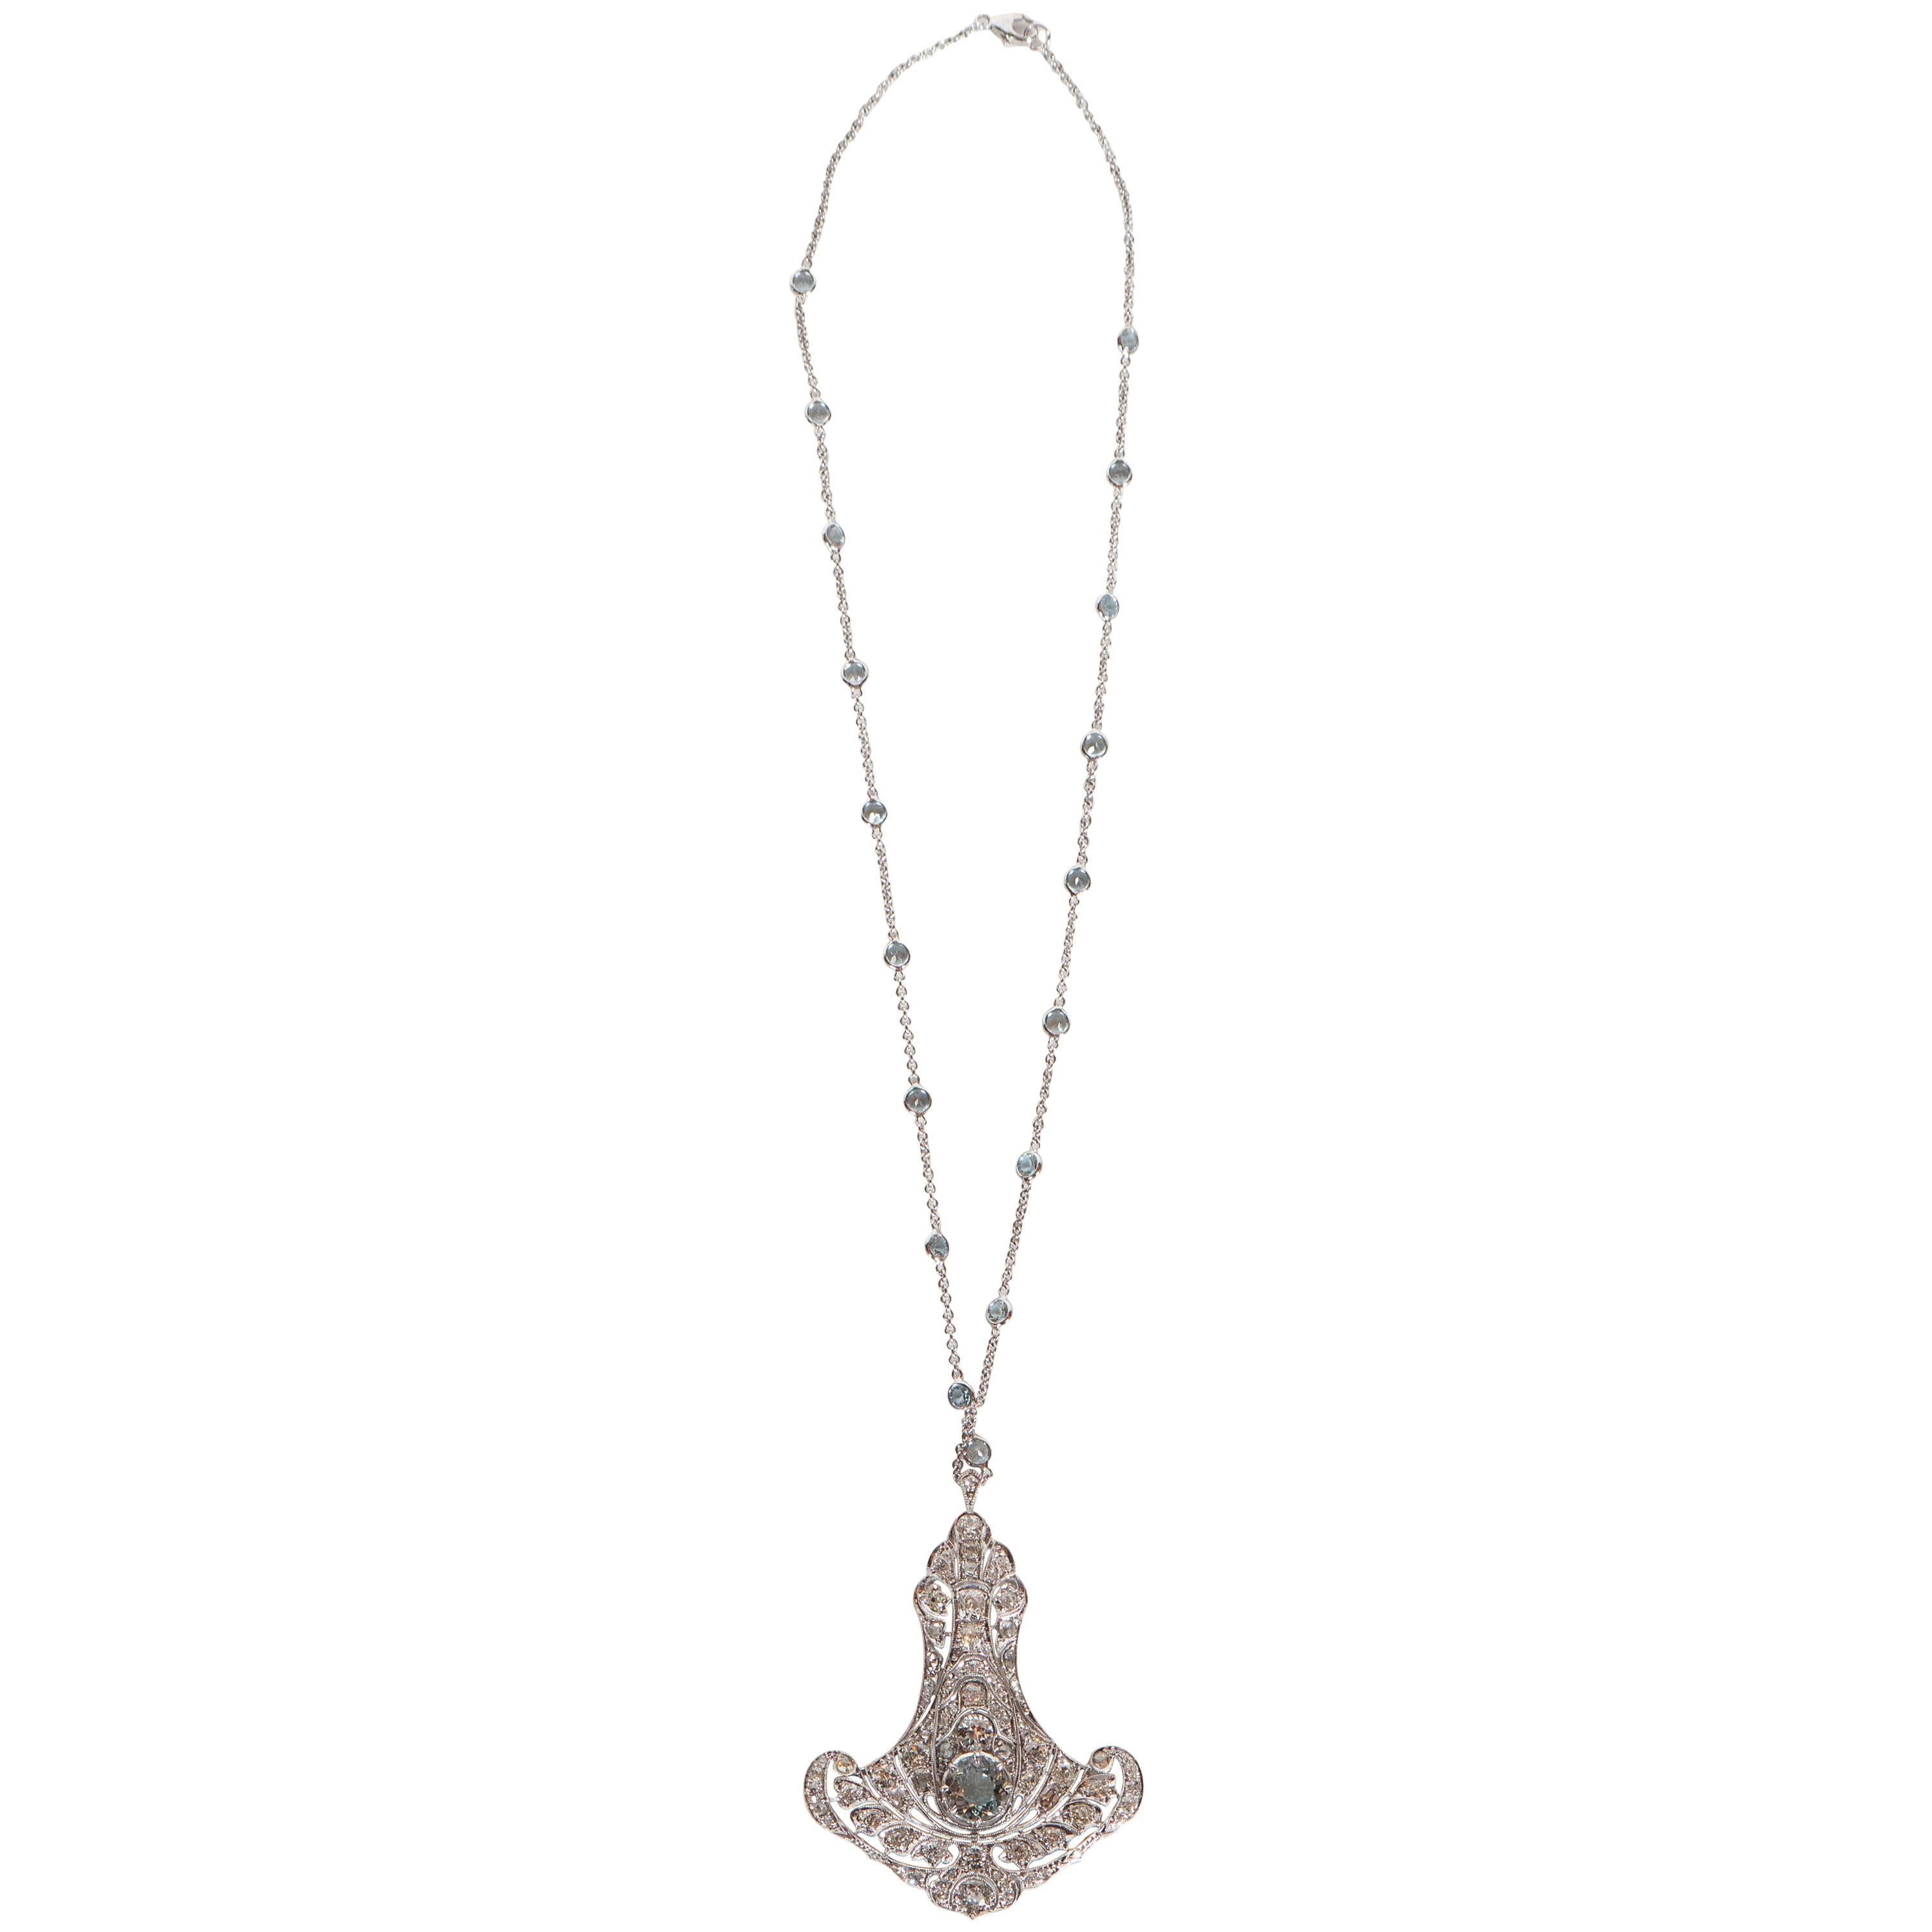 This stunning pendant is set with a round aquamarine of exceptional quality and the white gold chain is set with 18 aquamarines of same fine quality.The platinum pendant is set with approximately 2 carats of full cut diamonds.A great example of the